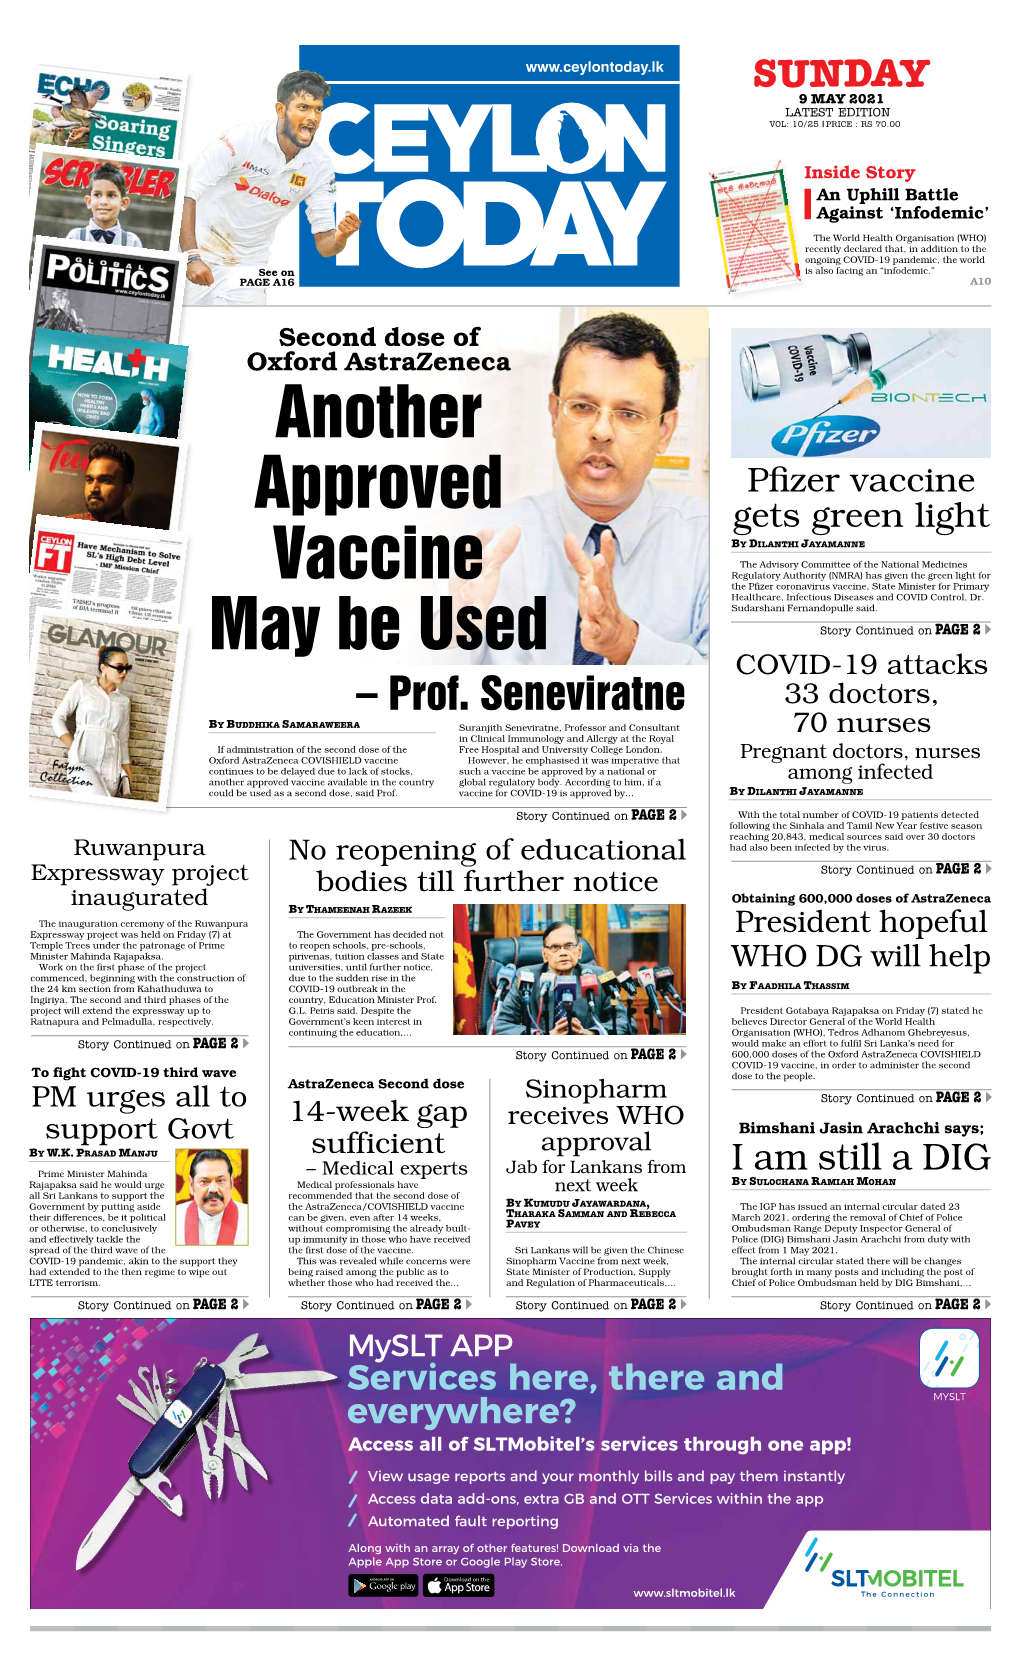 Another Approved Vaccine May Be Used